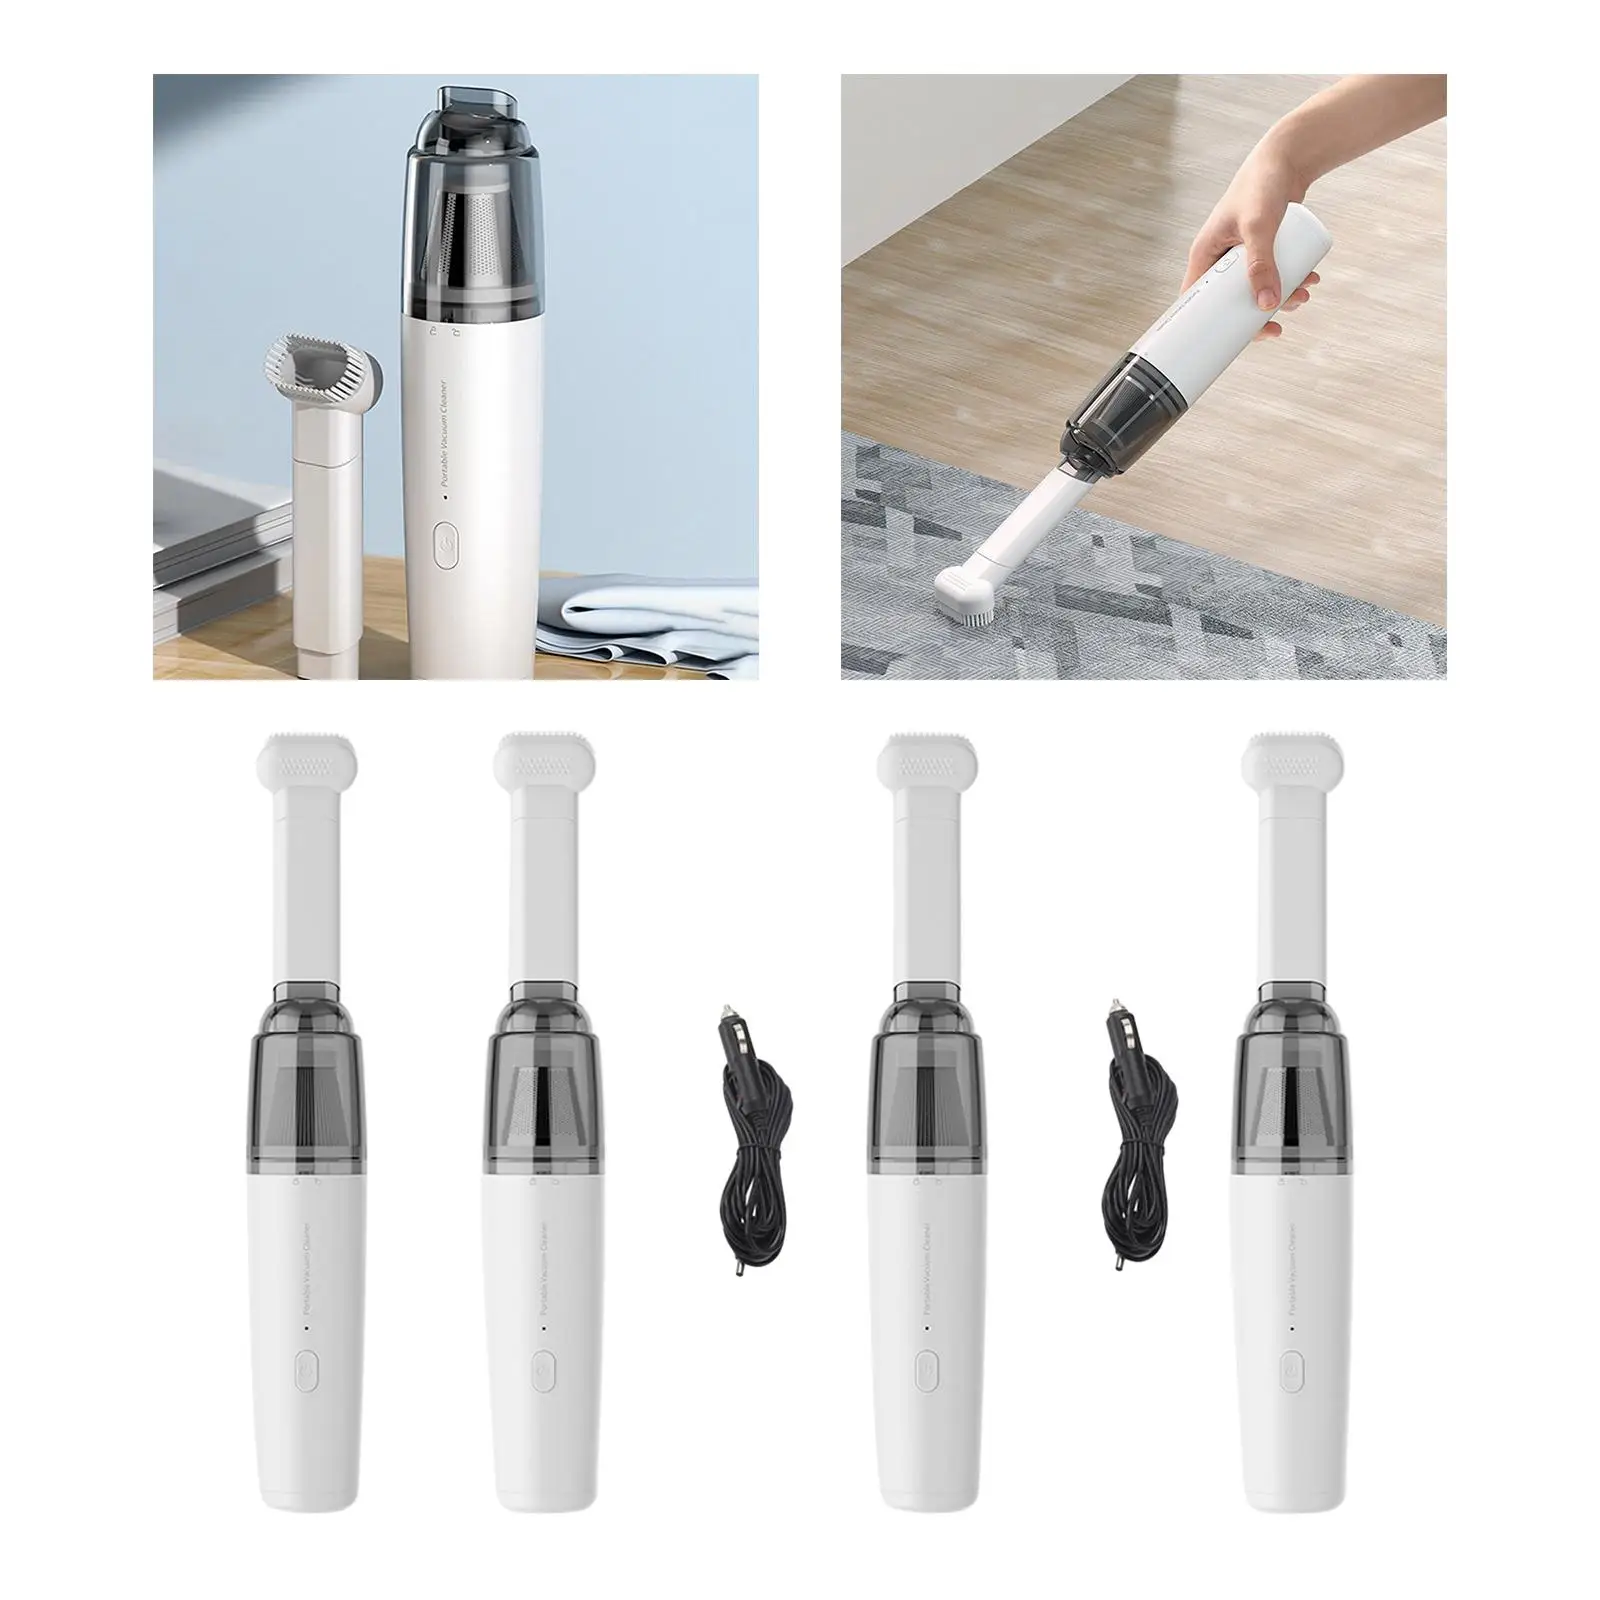 Handheld Vacuum Cleaner Lightweight Powerful Suction for Home